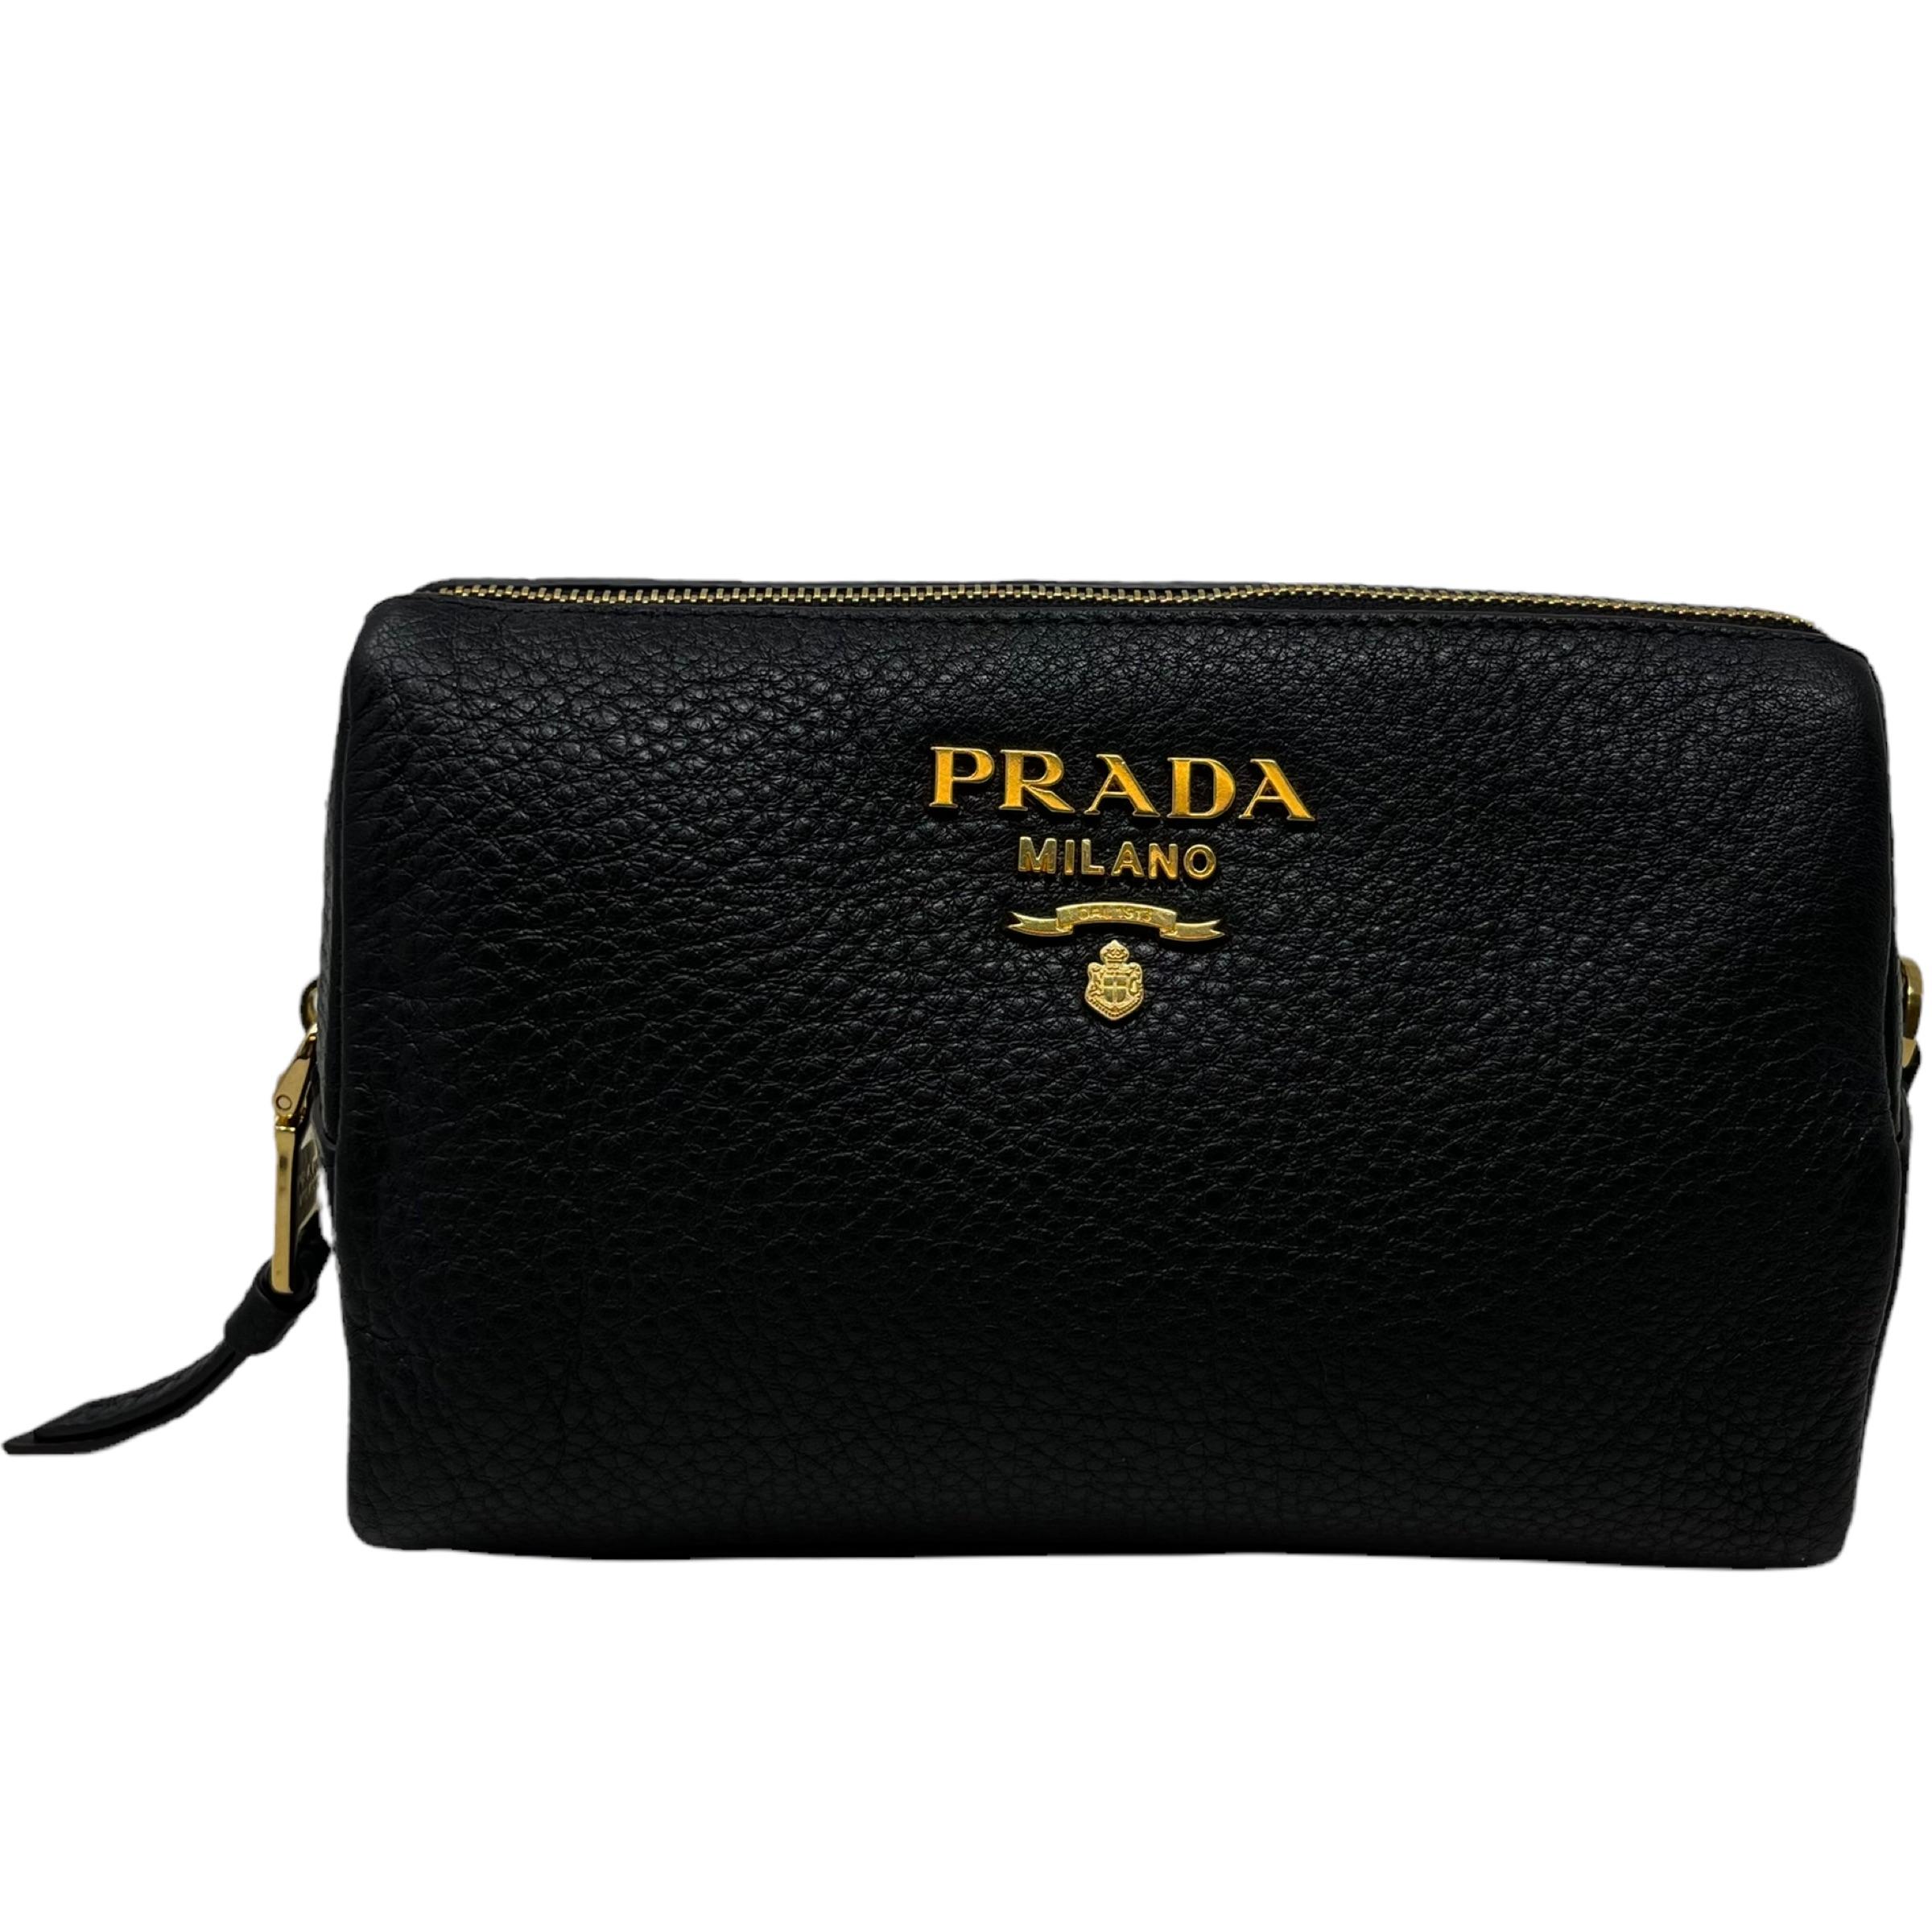 New Prada Black Vitello Daino Leather Cosmetic Pouch Clutch Travel Bag

Authenticity Guaranteed

DETAILS
Brand: Prada
Condition: Brand New
Category: Clutch
Gender: Unisex
Color: Black
Material: Leather
Logo plaque
Gold-tone hardware
Top zip